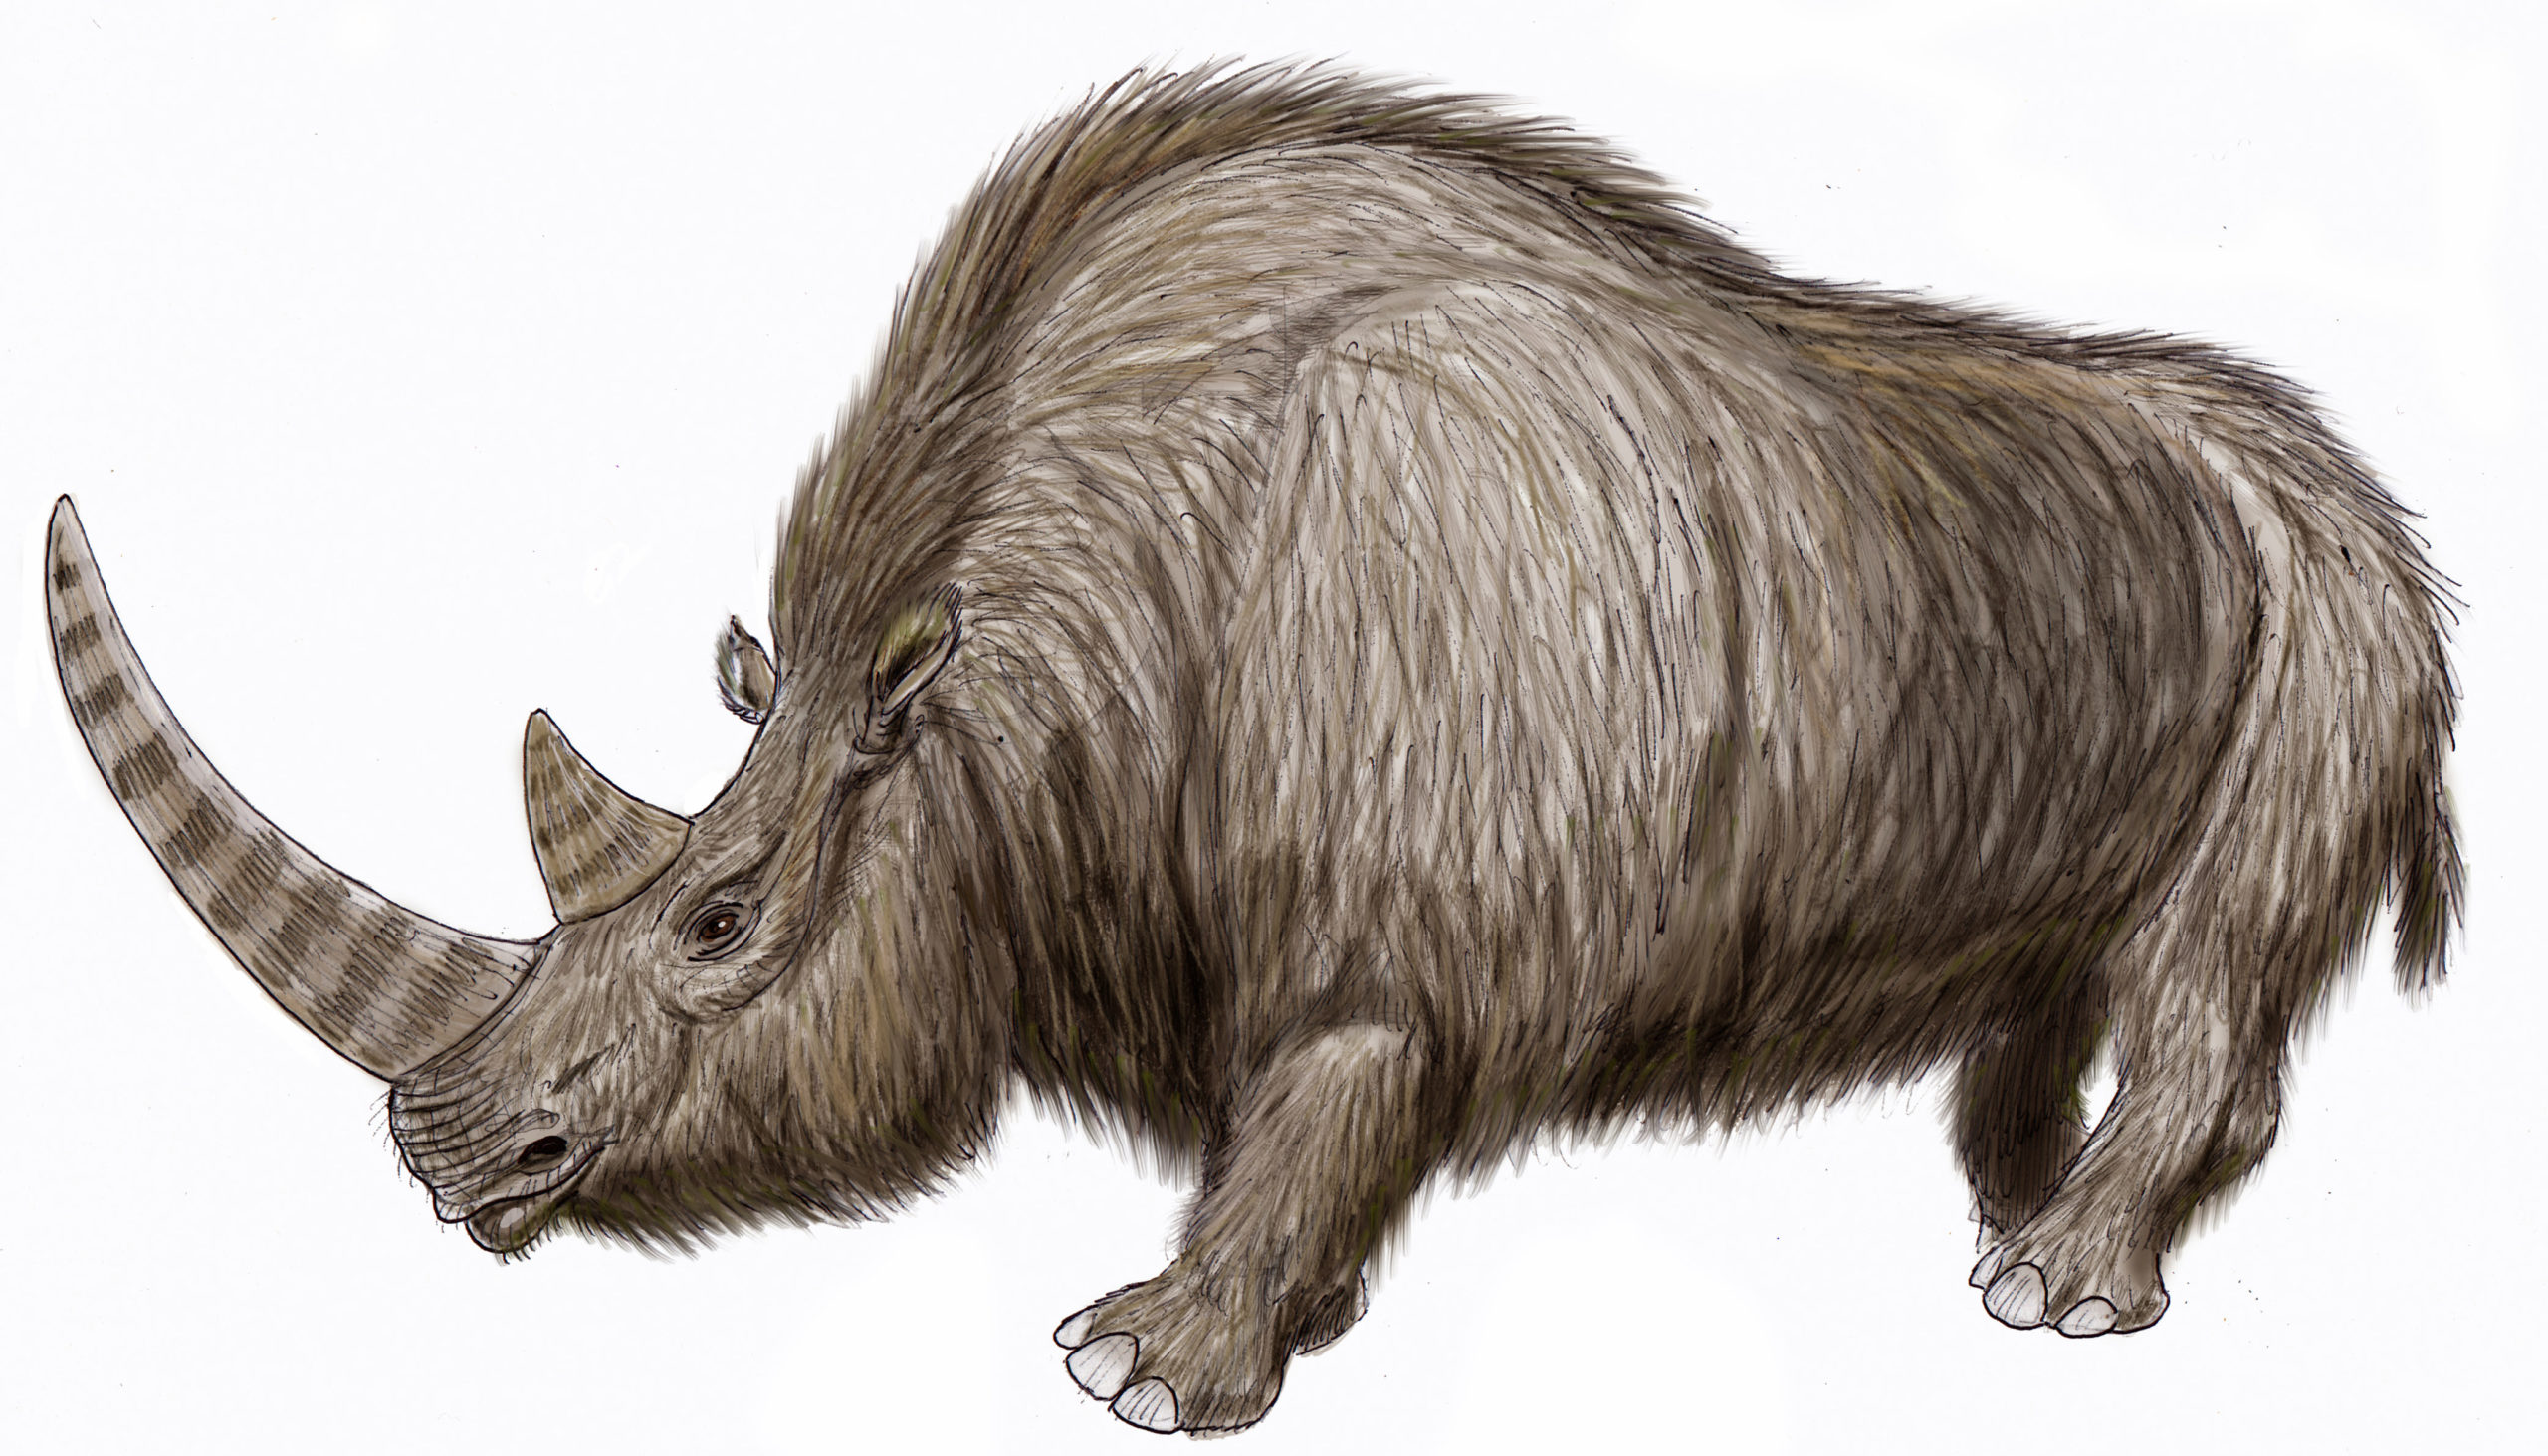 Artist's reconstruction of Wooly Rhinoceros (Illustration: Wikimedia Commons, Fair Use)